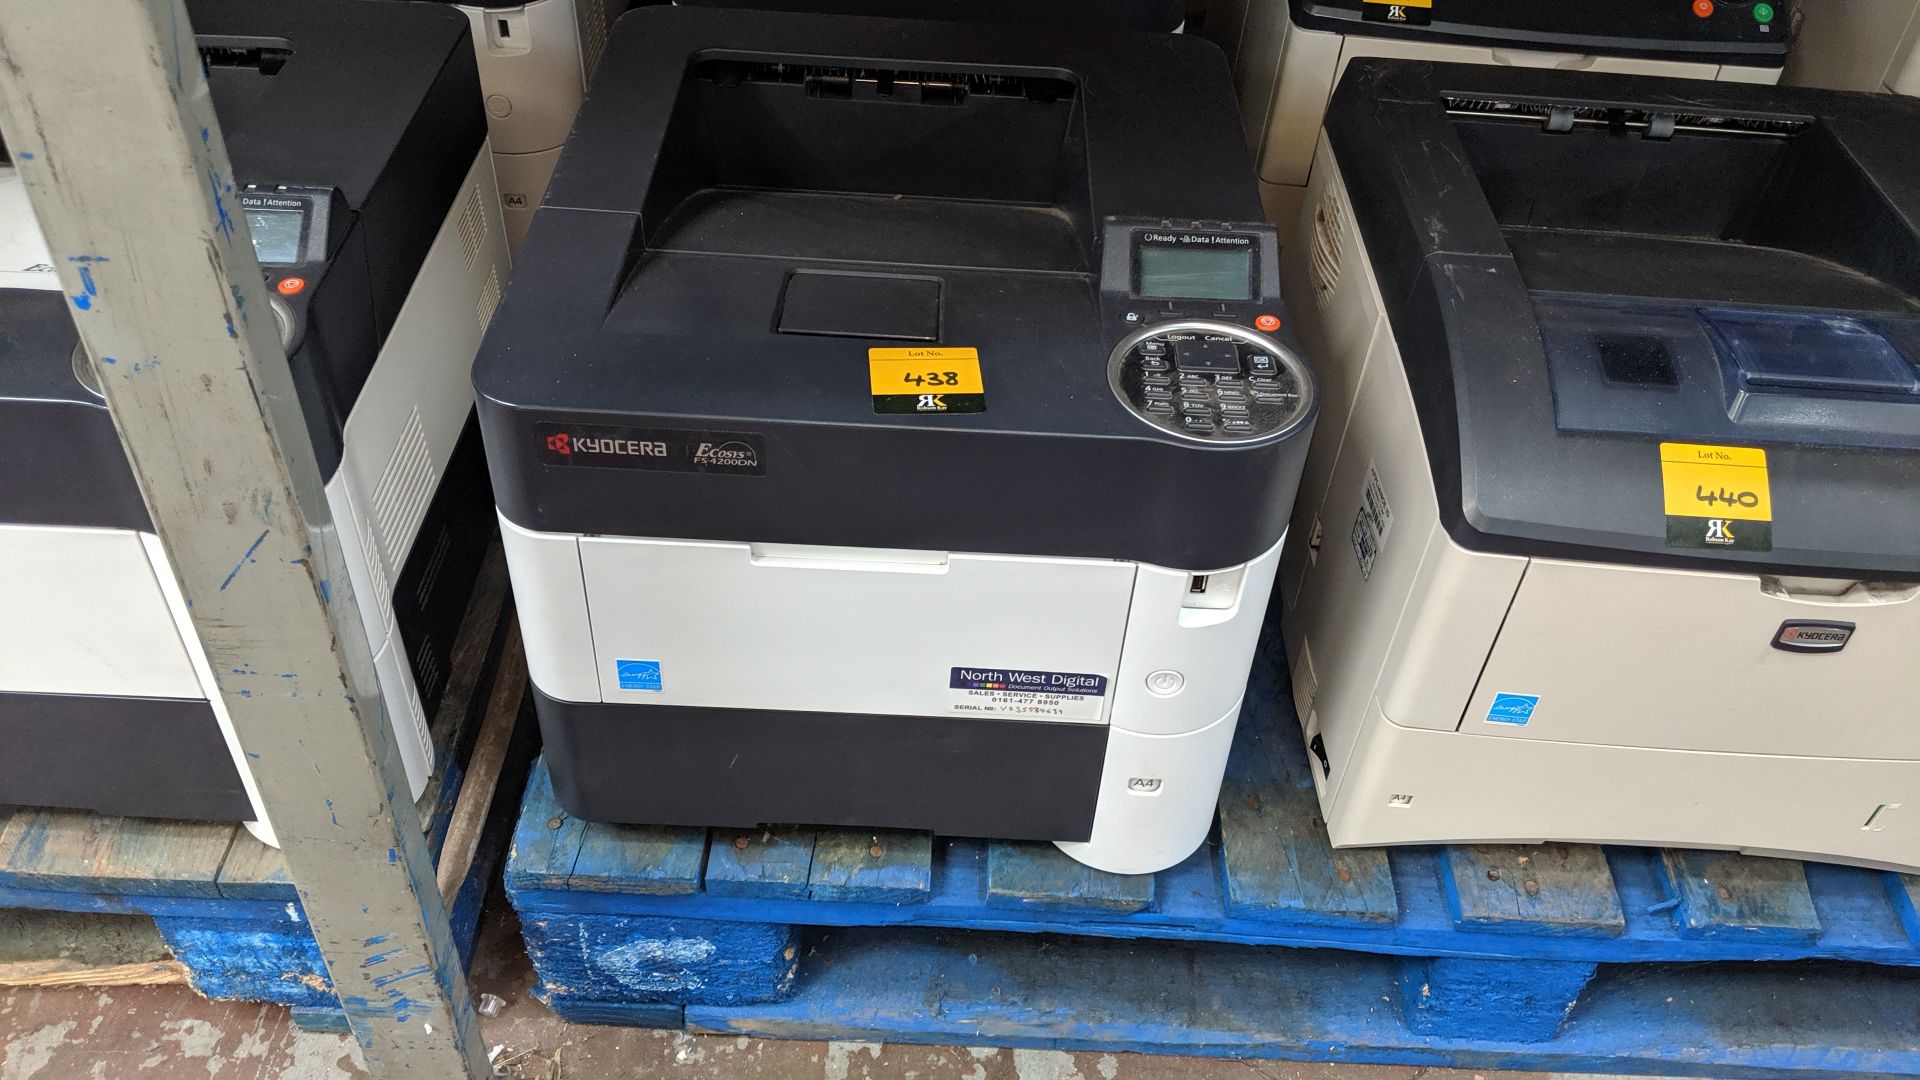 Kyocera A4 desktop laser printer model FS-4200DN. This is one of a large number of lots being sold - Image 2 of 2